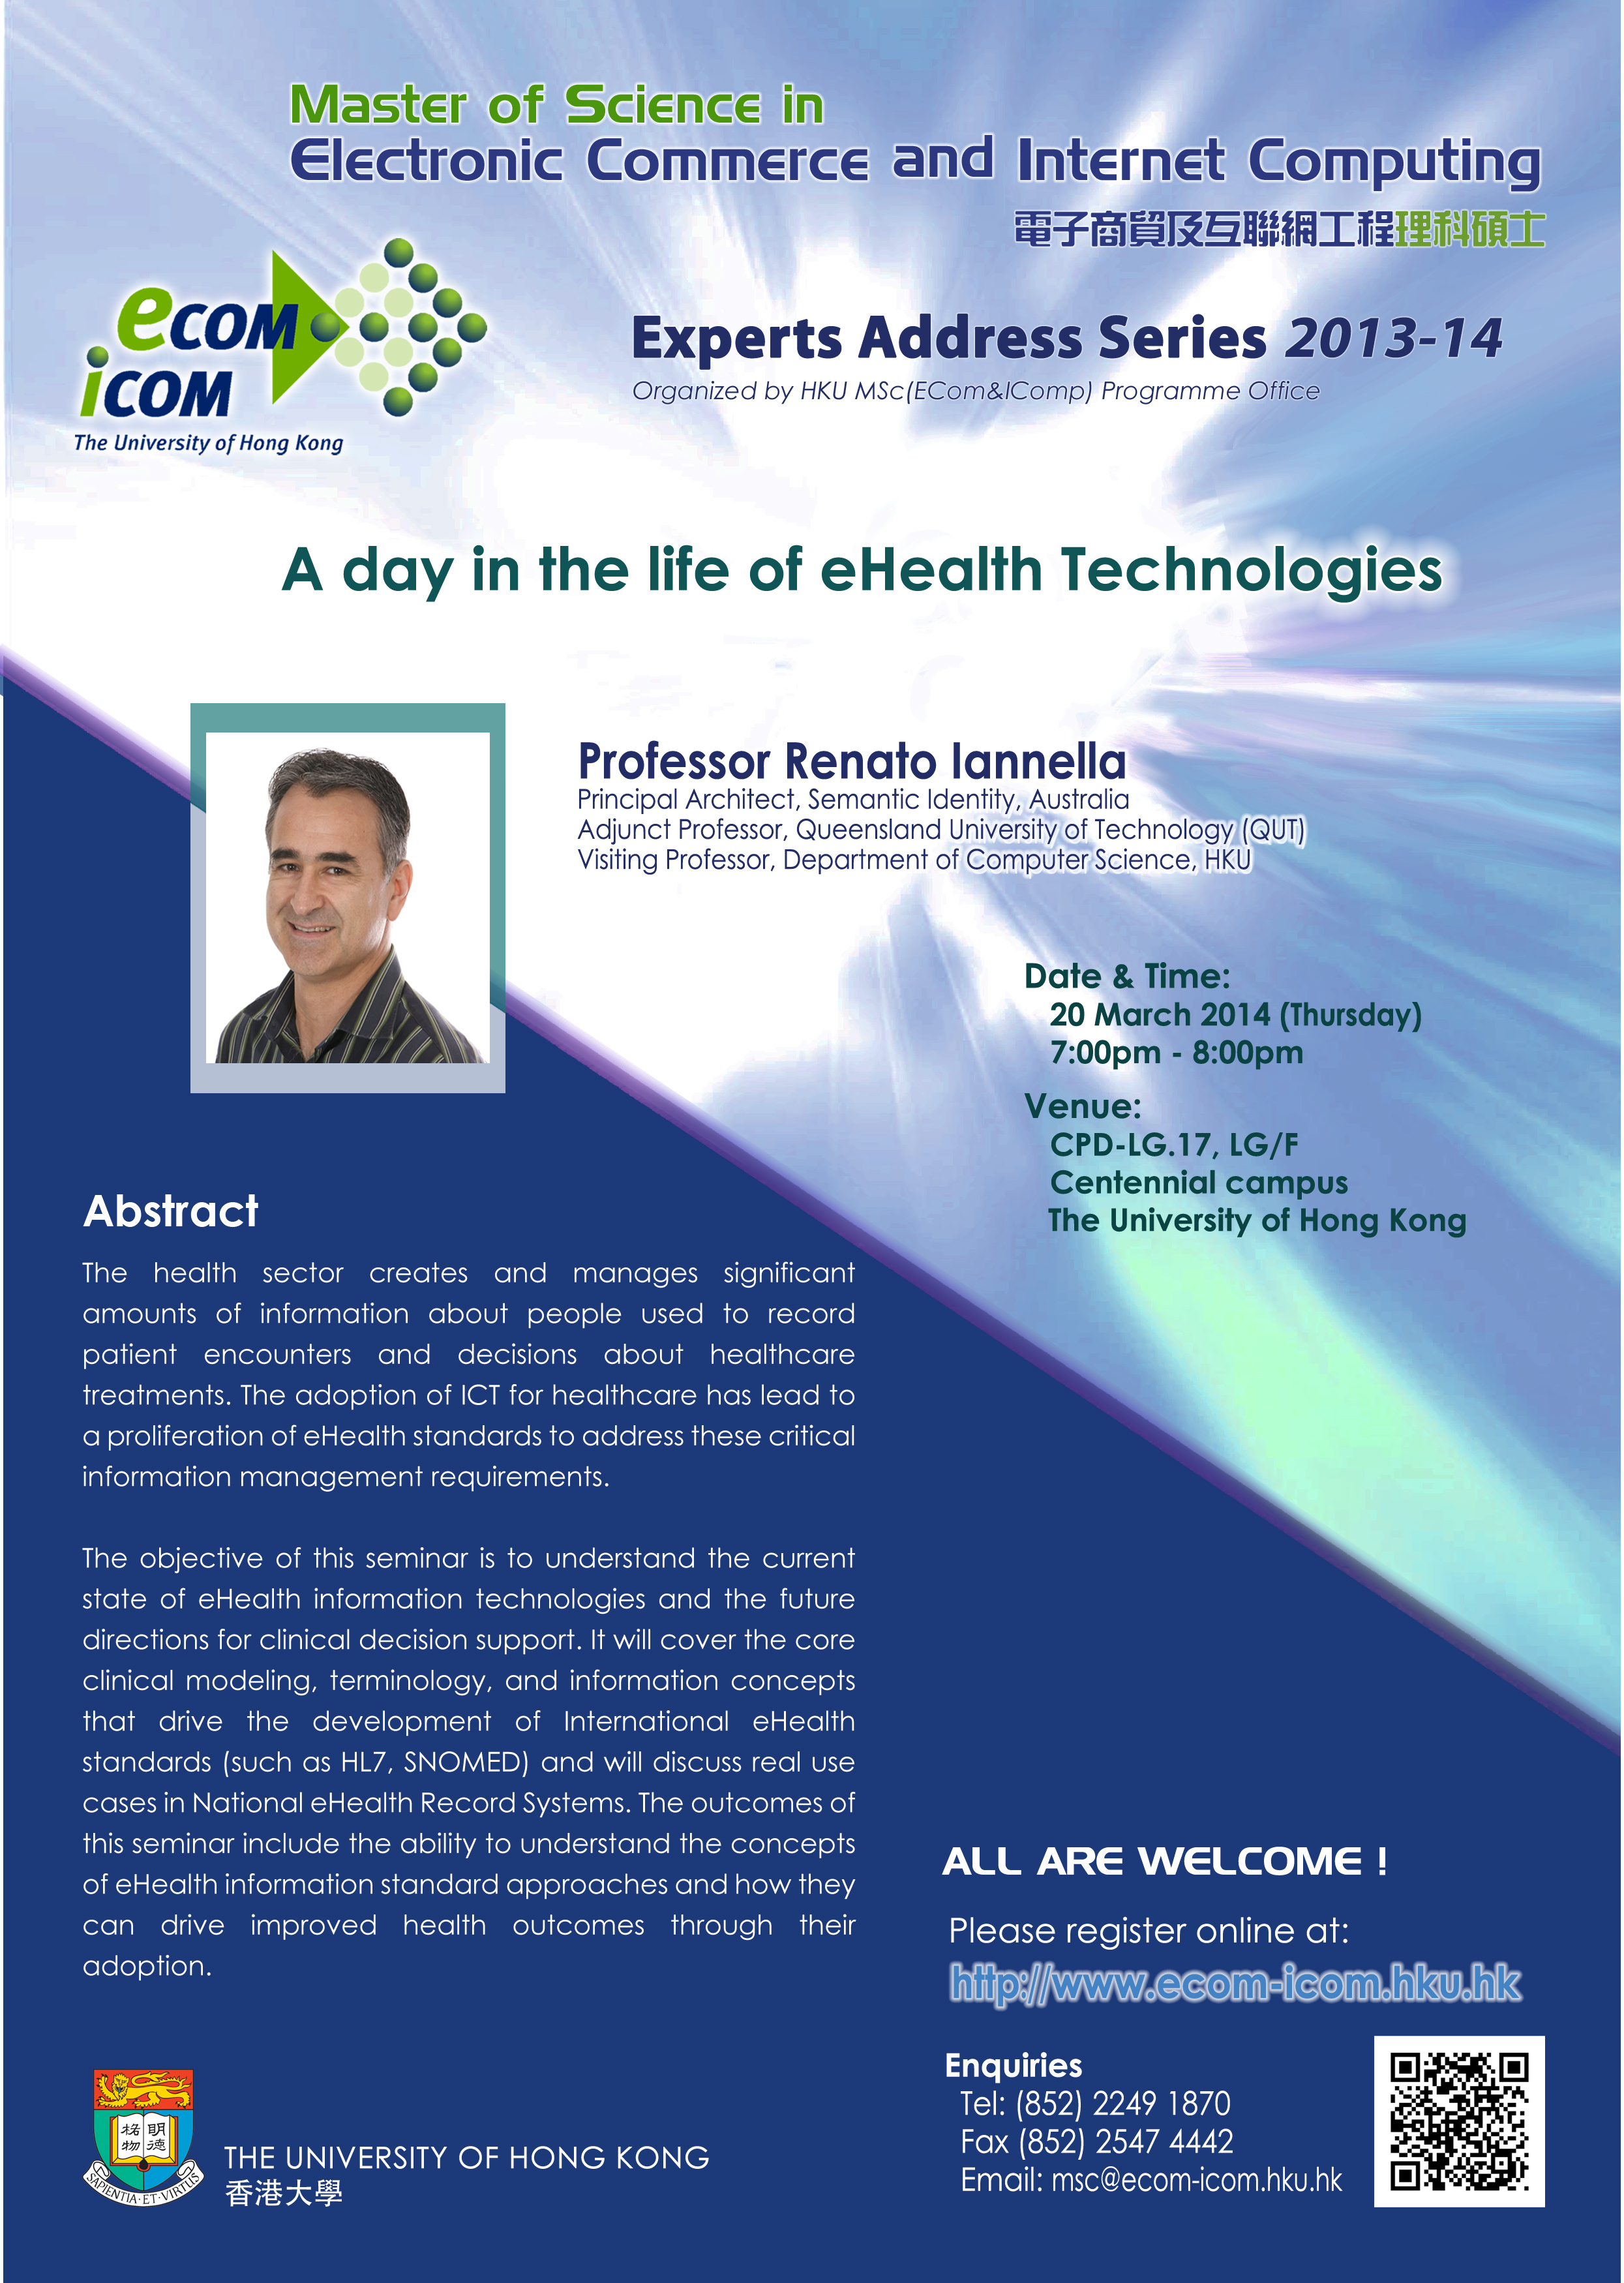 MSc (ECom&IComp) Experts Address: A day in the life of eHealth Technologies